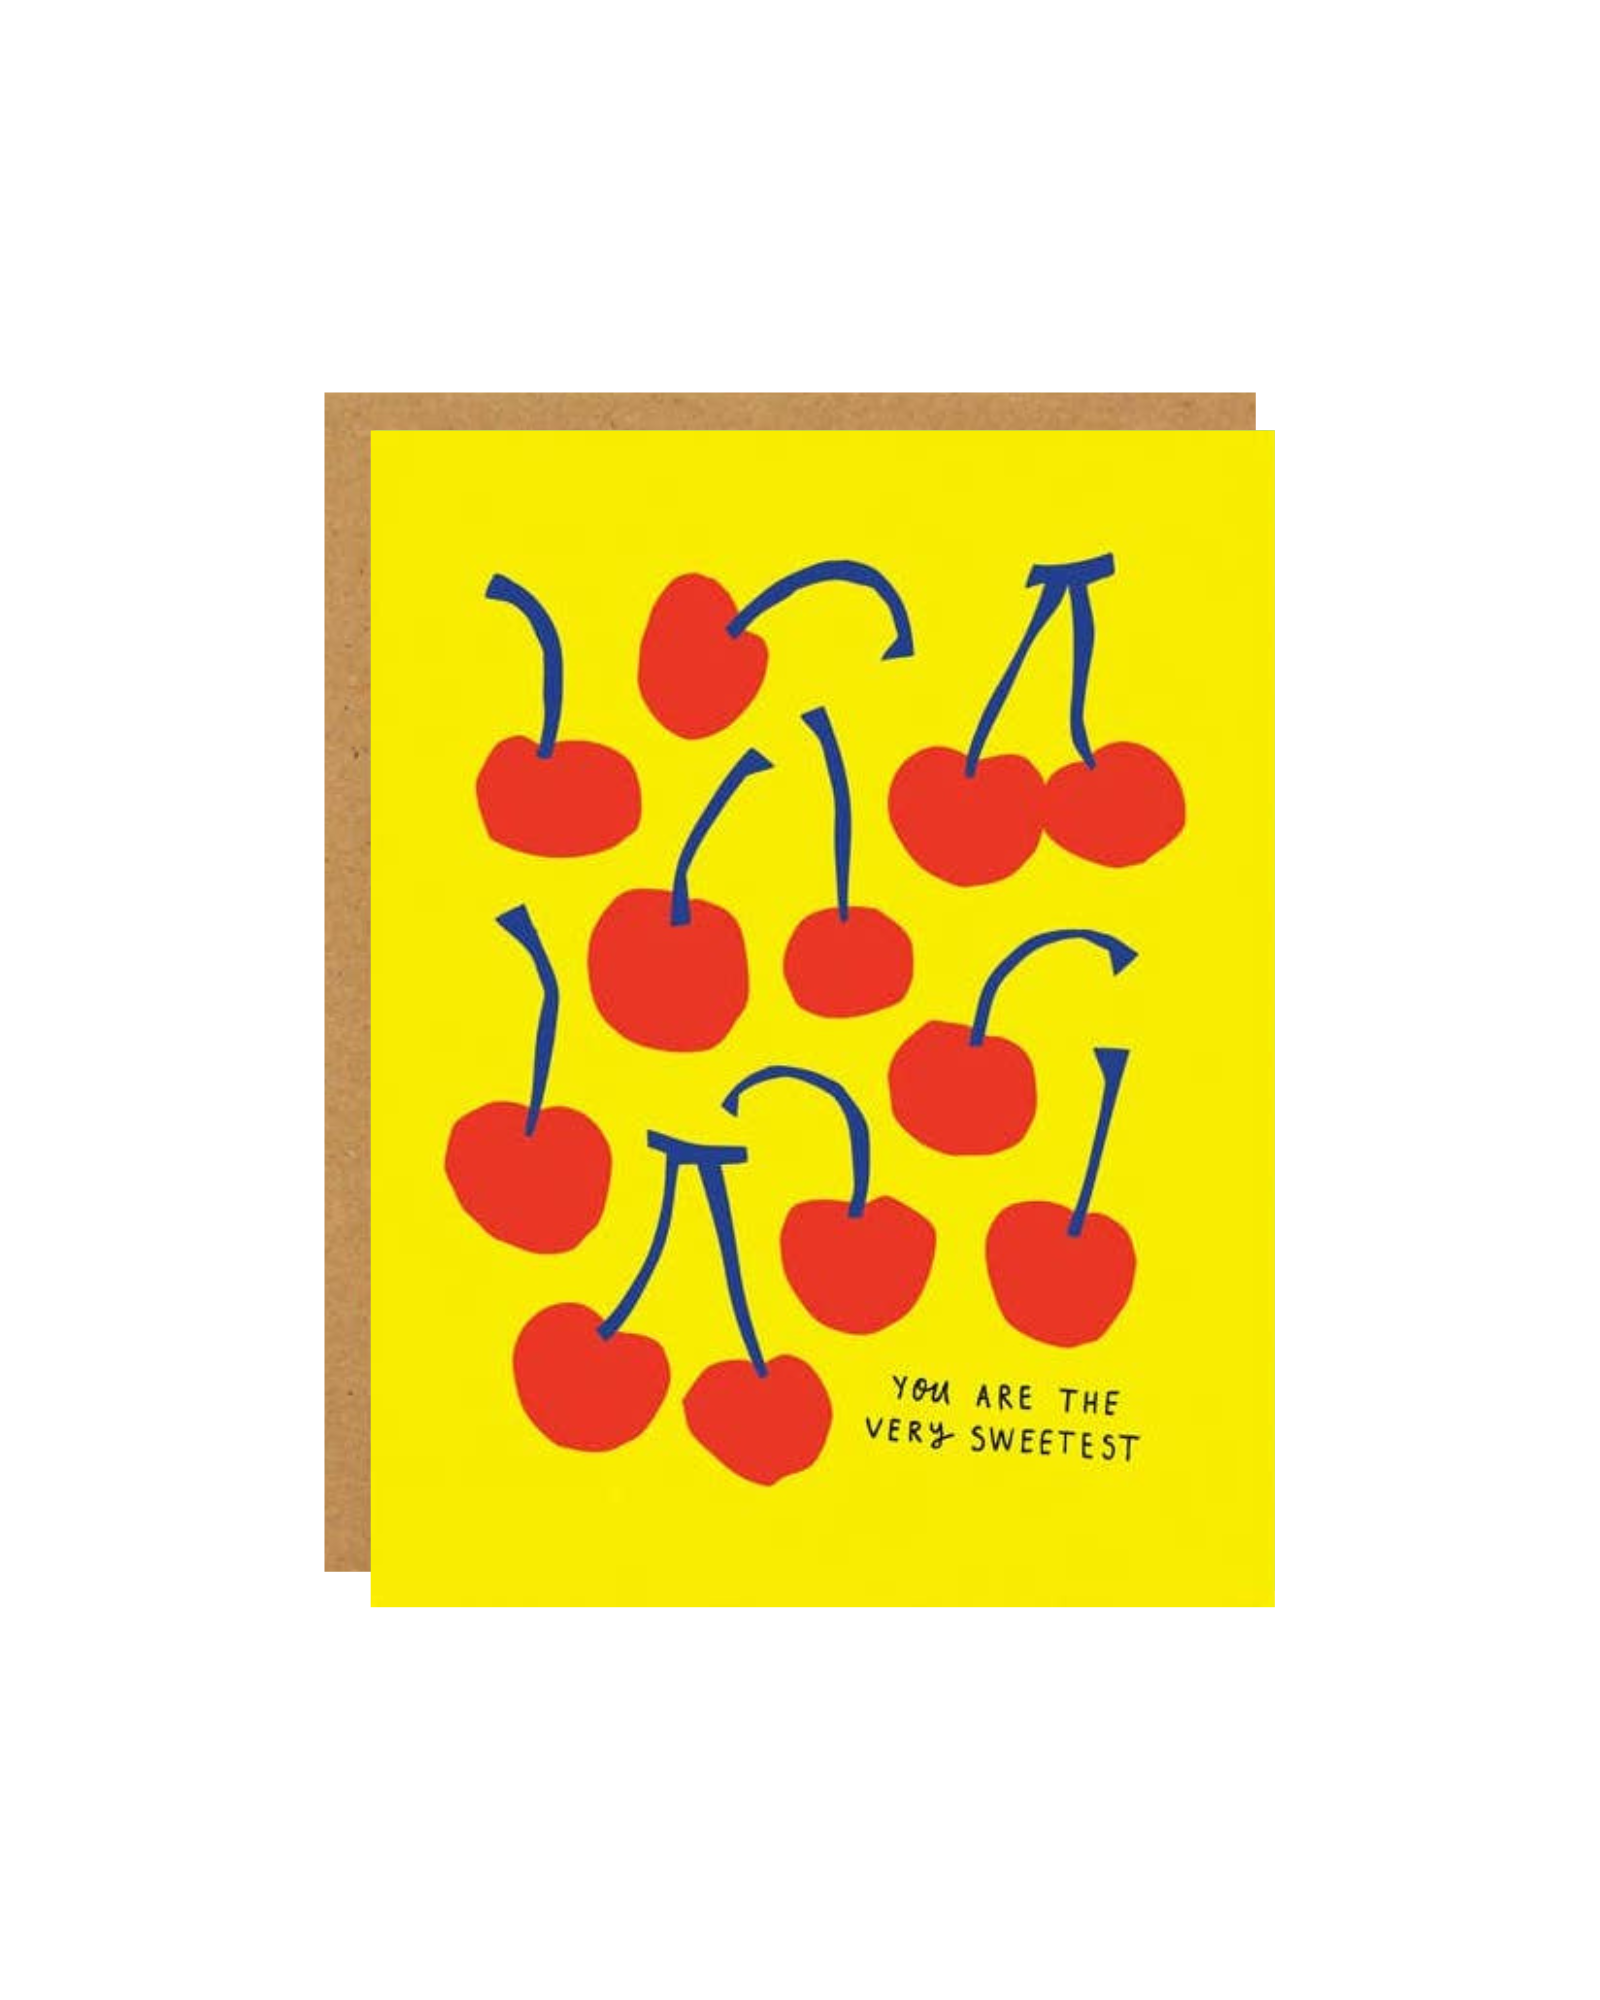 Yellow greeting card with red cherries and text bottom right that reads "you are the very sweetest"